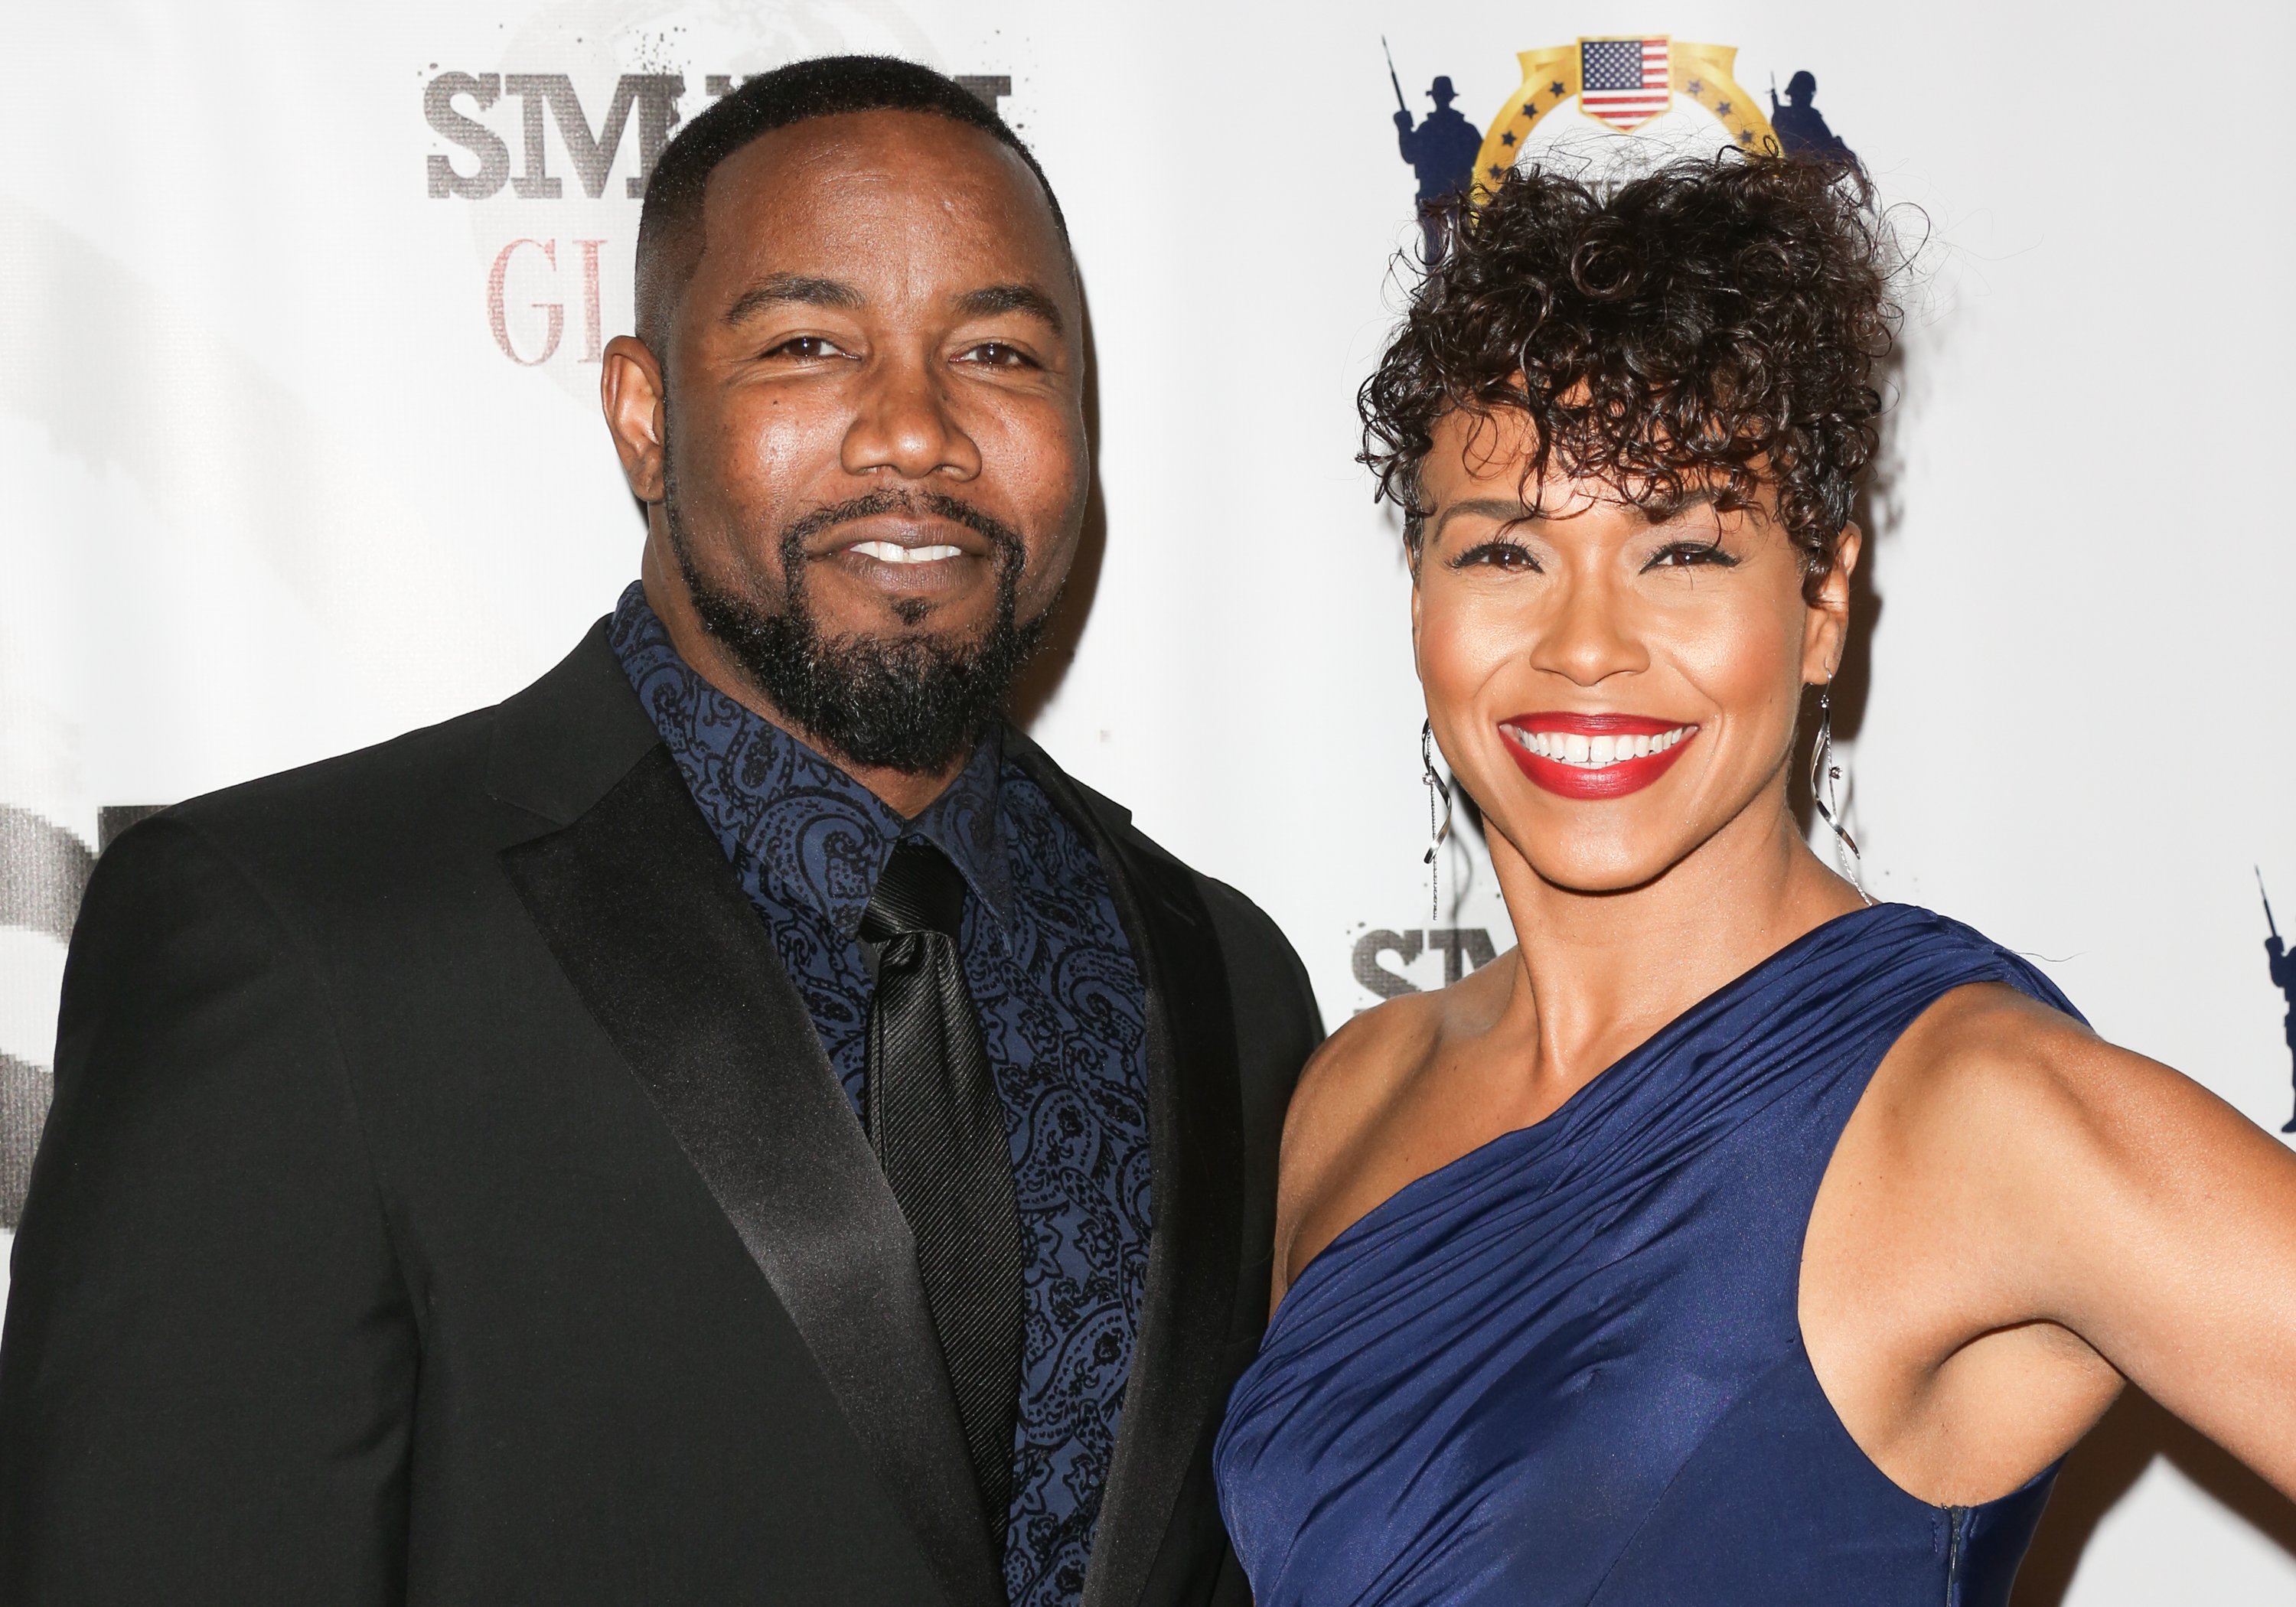 Michael Jai White and Gillian Iliana Waters on February 23, 2017 in Los Angeles, California | Photo: Getty Images